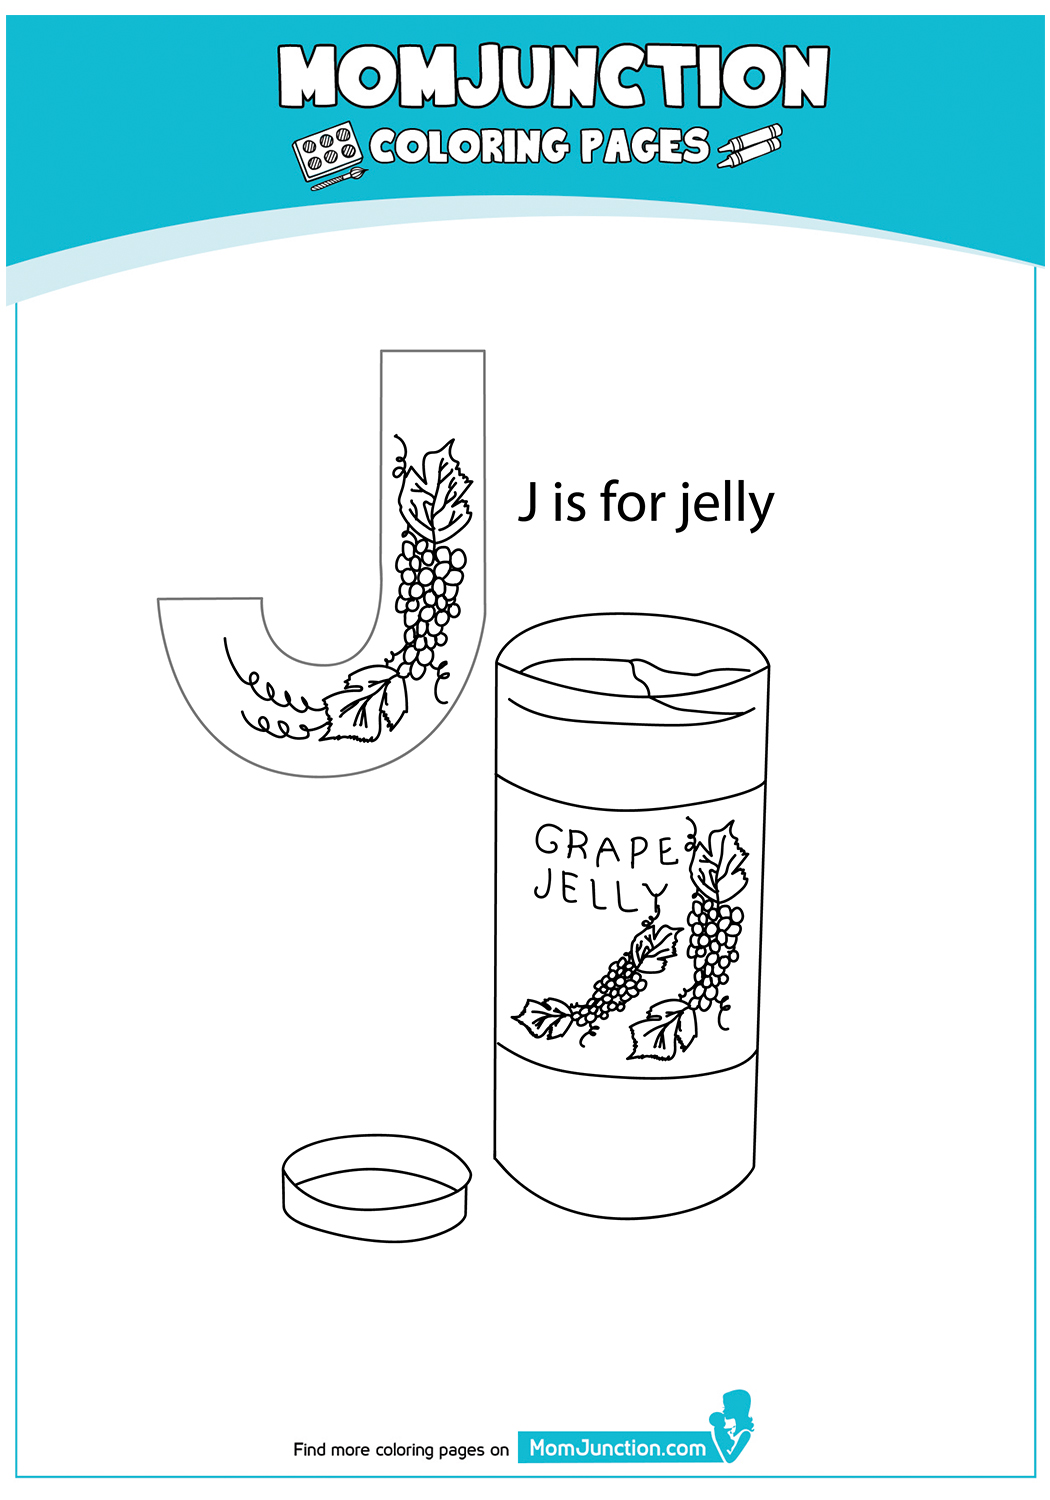 The-J-For-Jelly-17